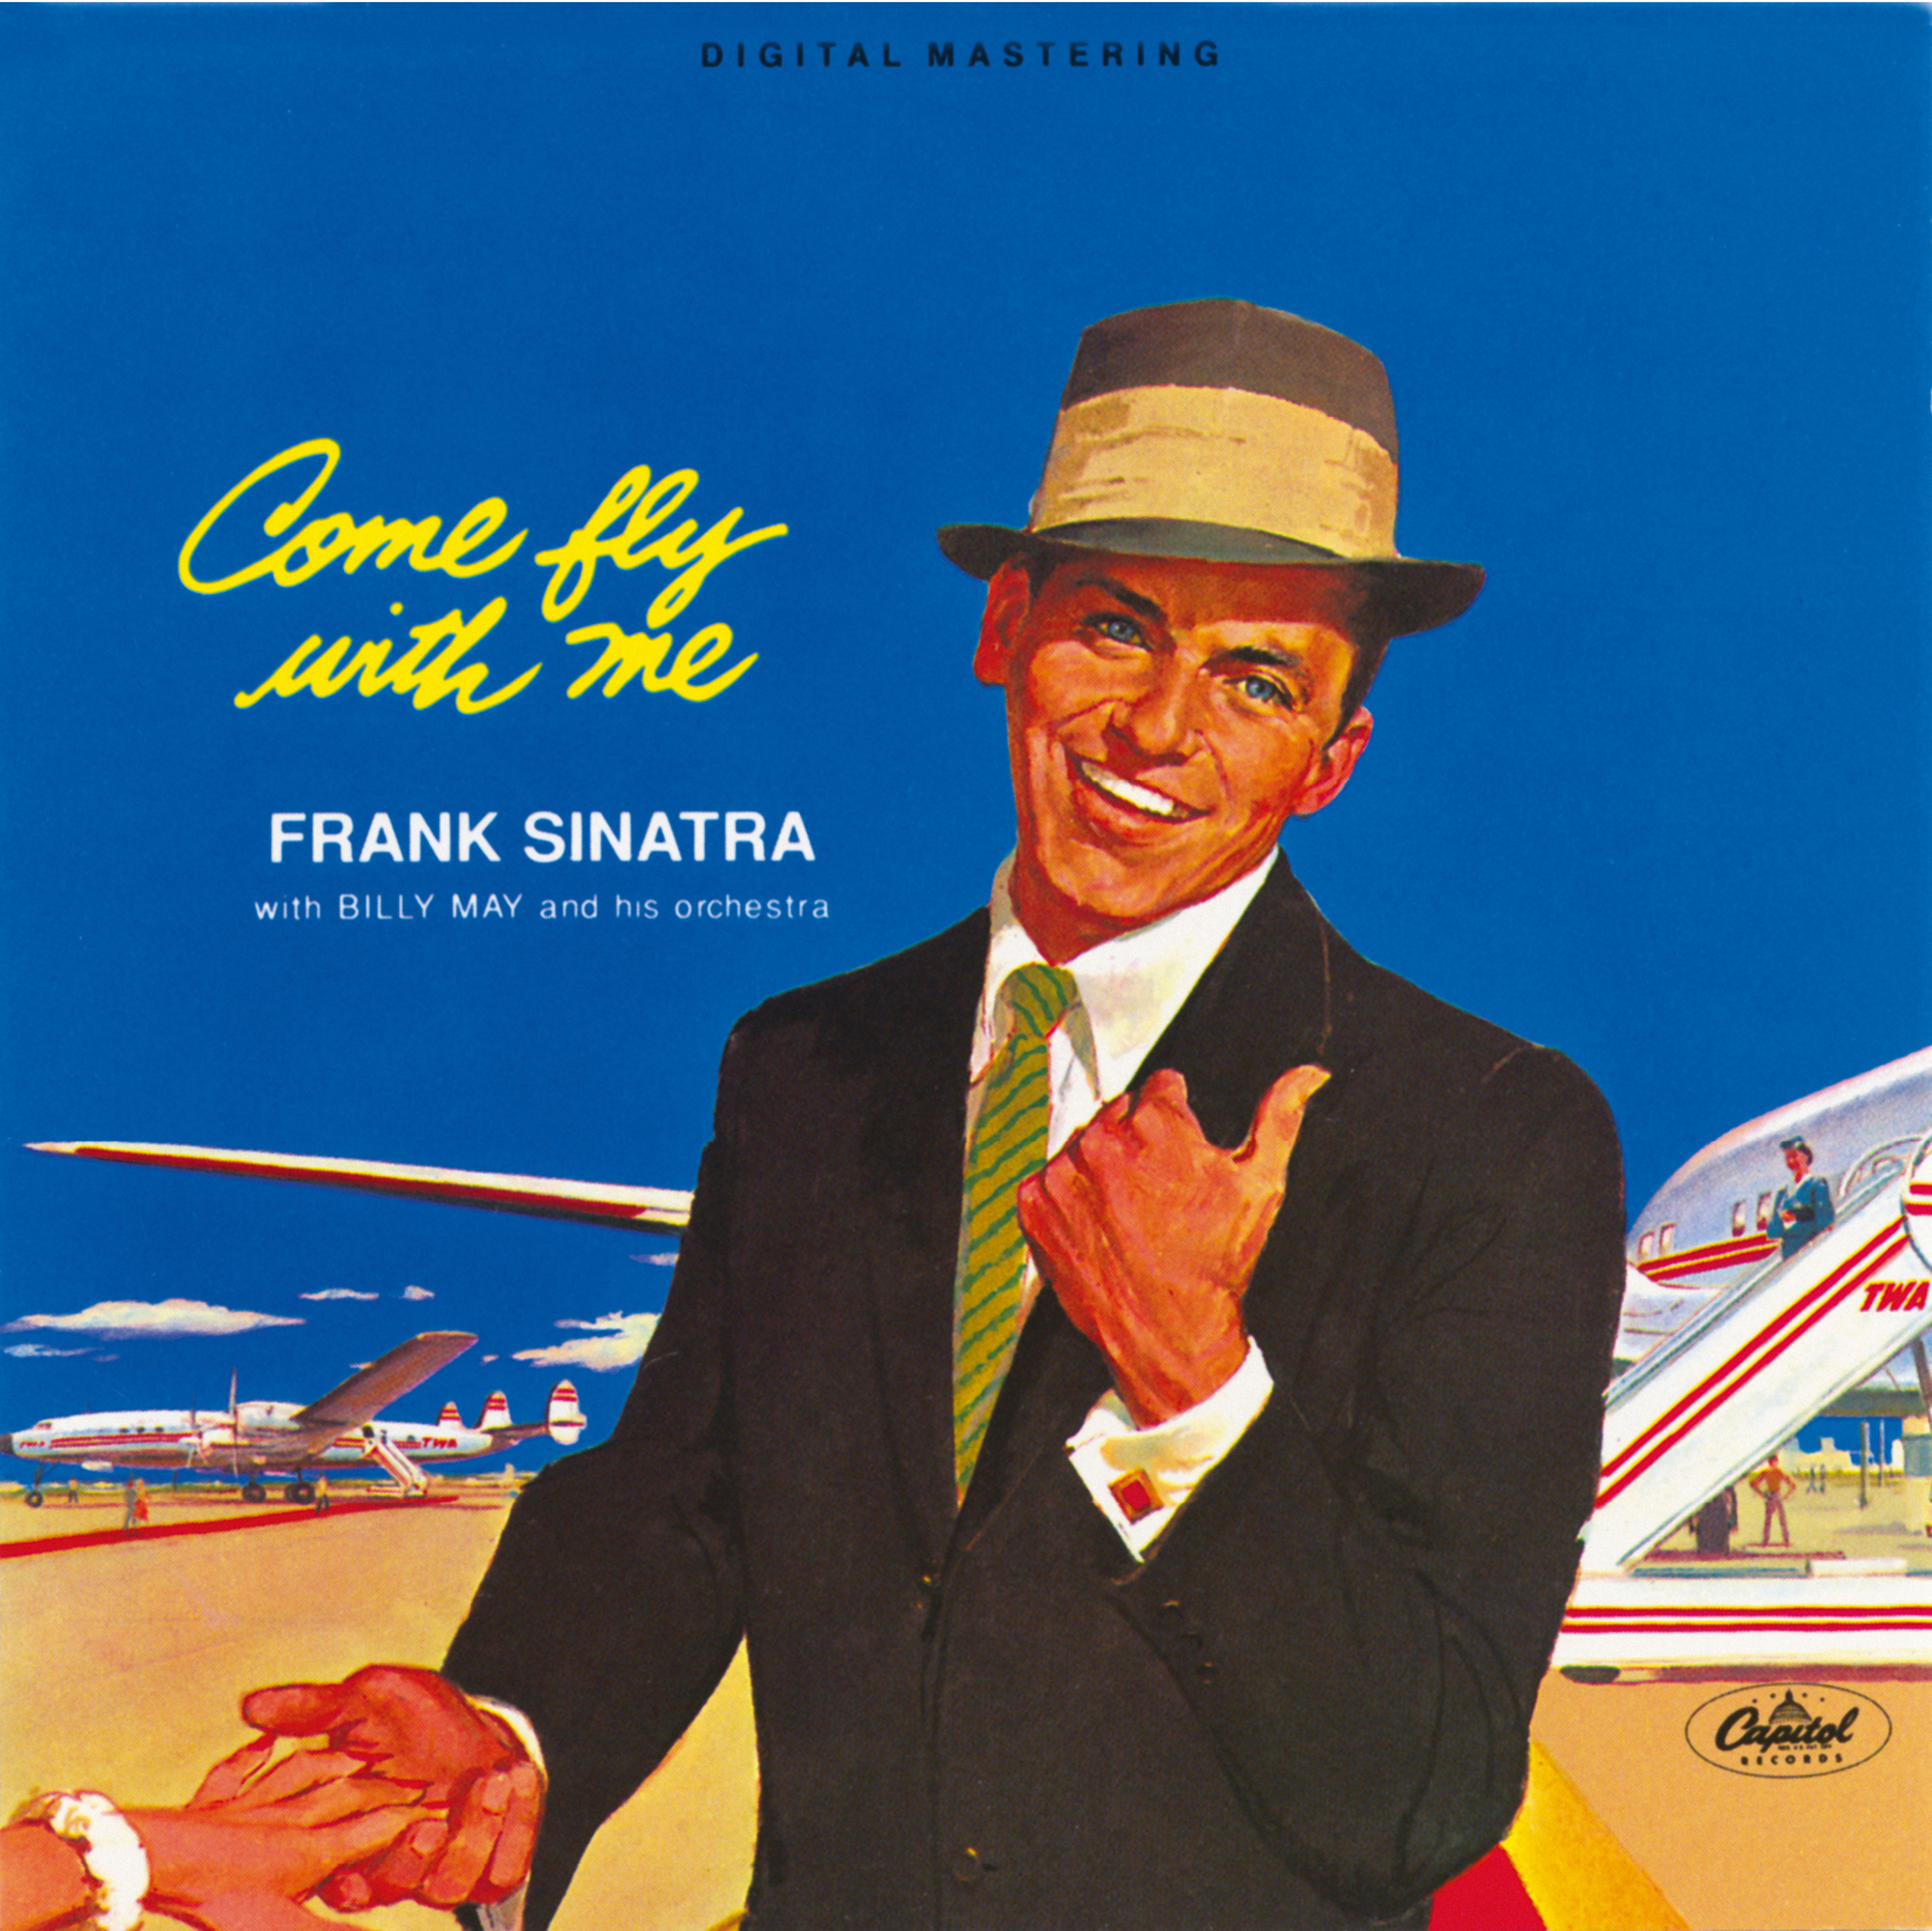 The cover of Frank Sinatra’s nineteen fifty album, “Come Fly with Me,” showing the singer in front of a jet.